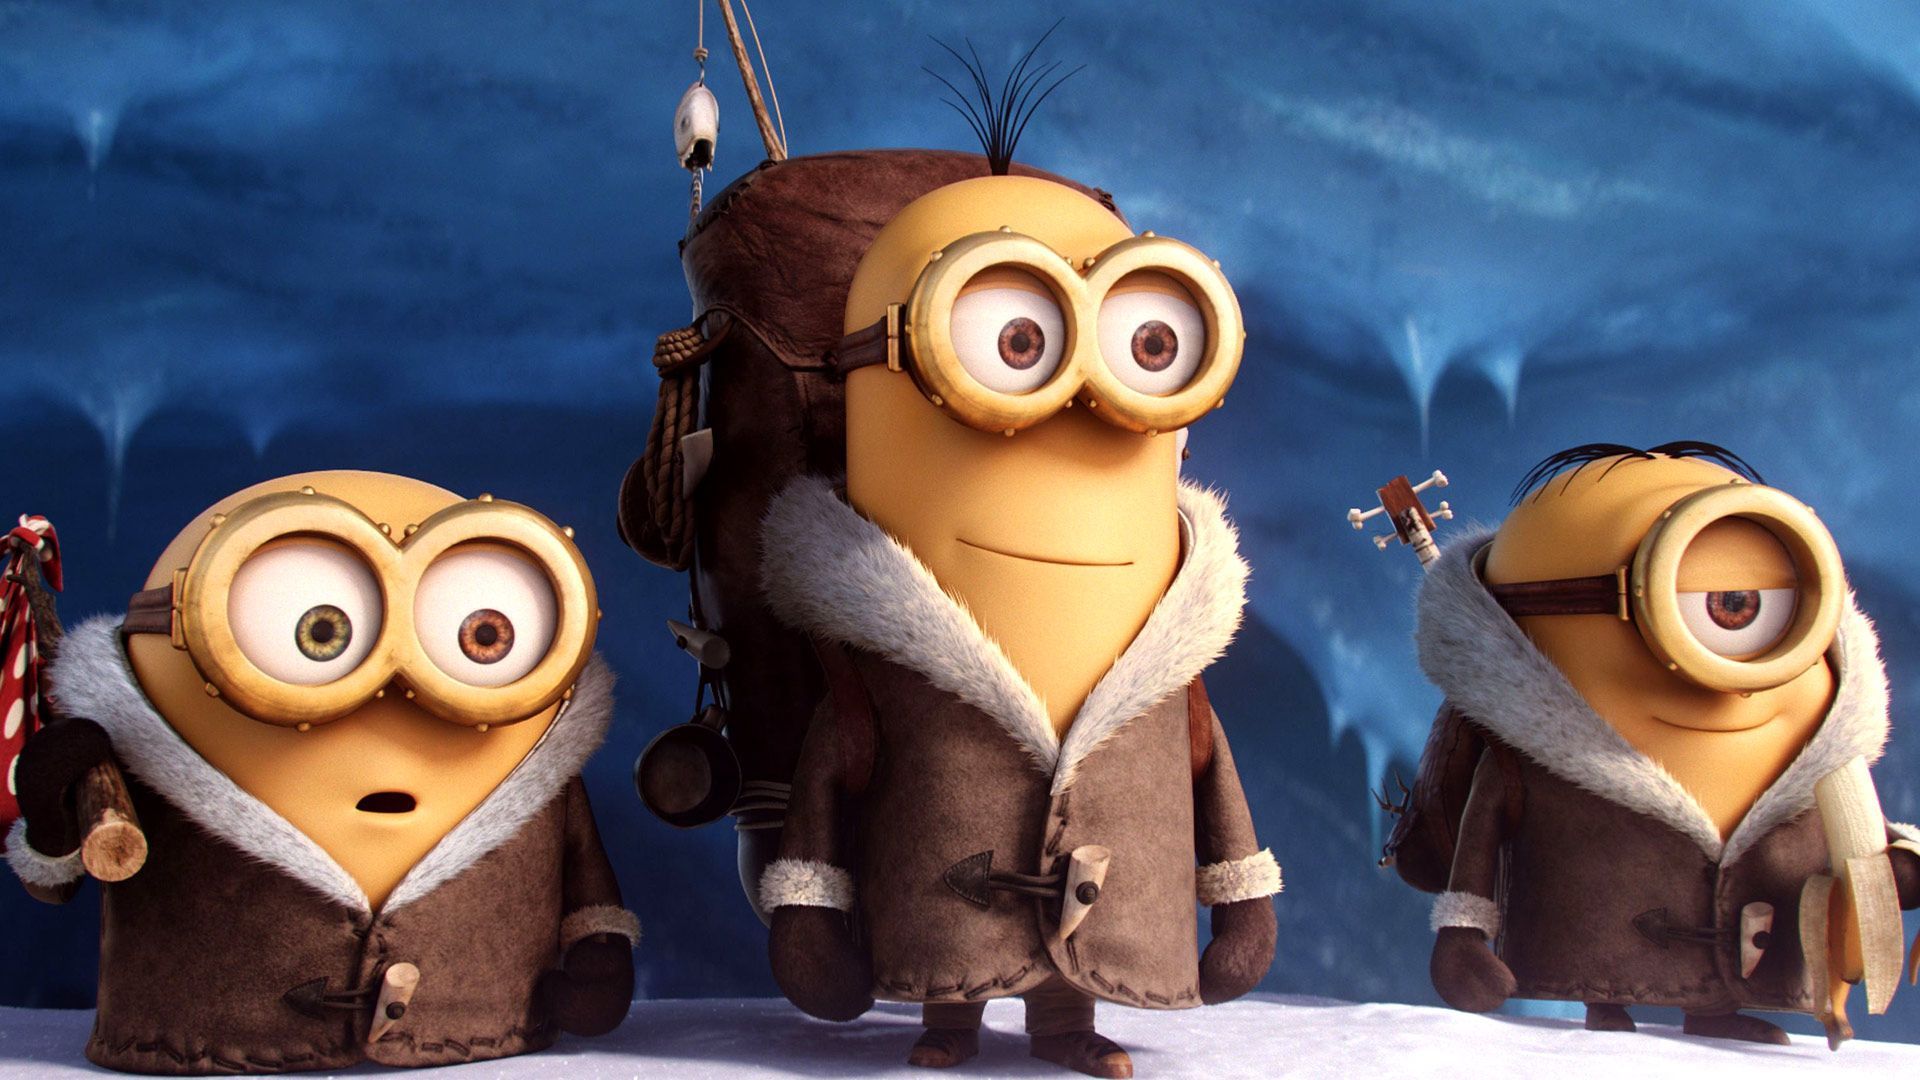 Minions 2015 Movie wallpapers – Free full hd wallpapers for 1080p ...